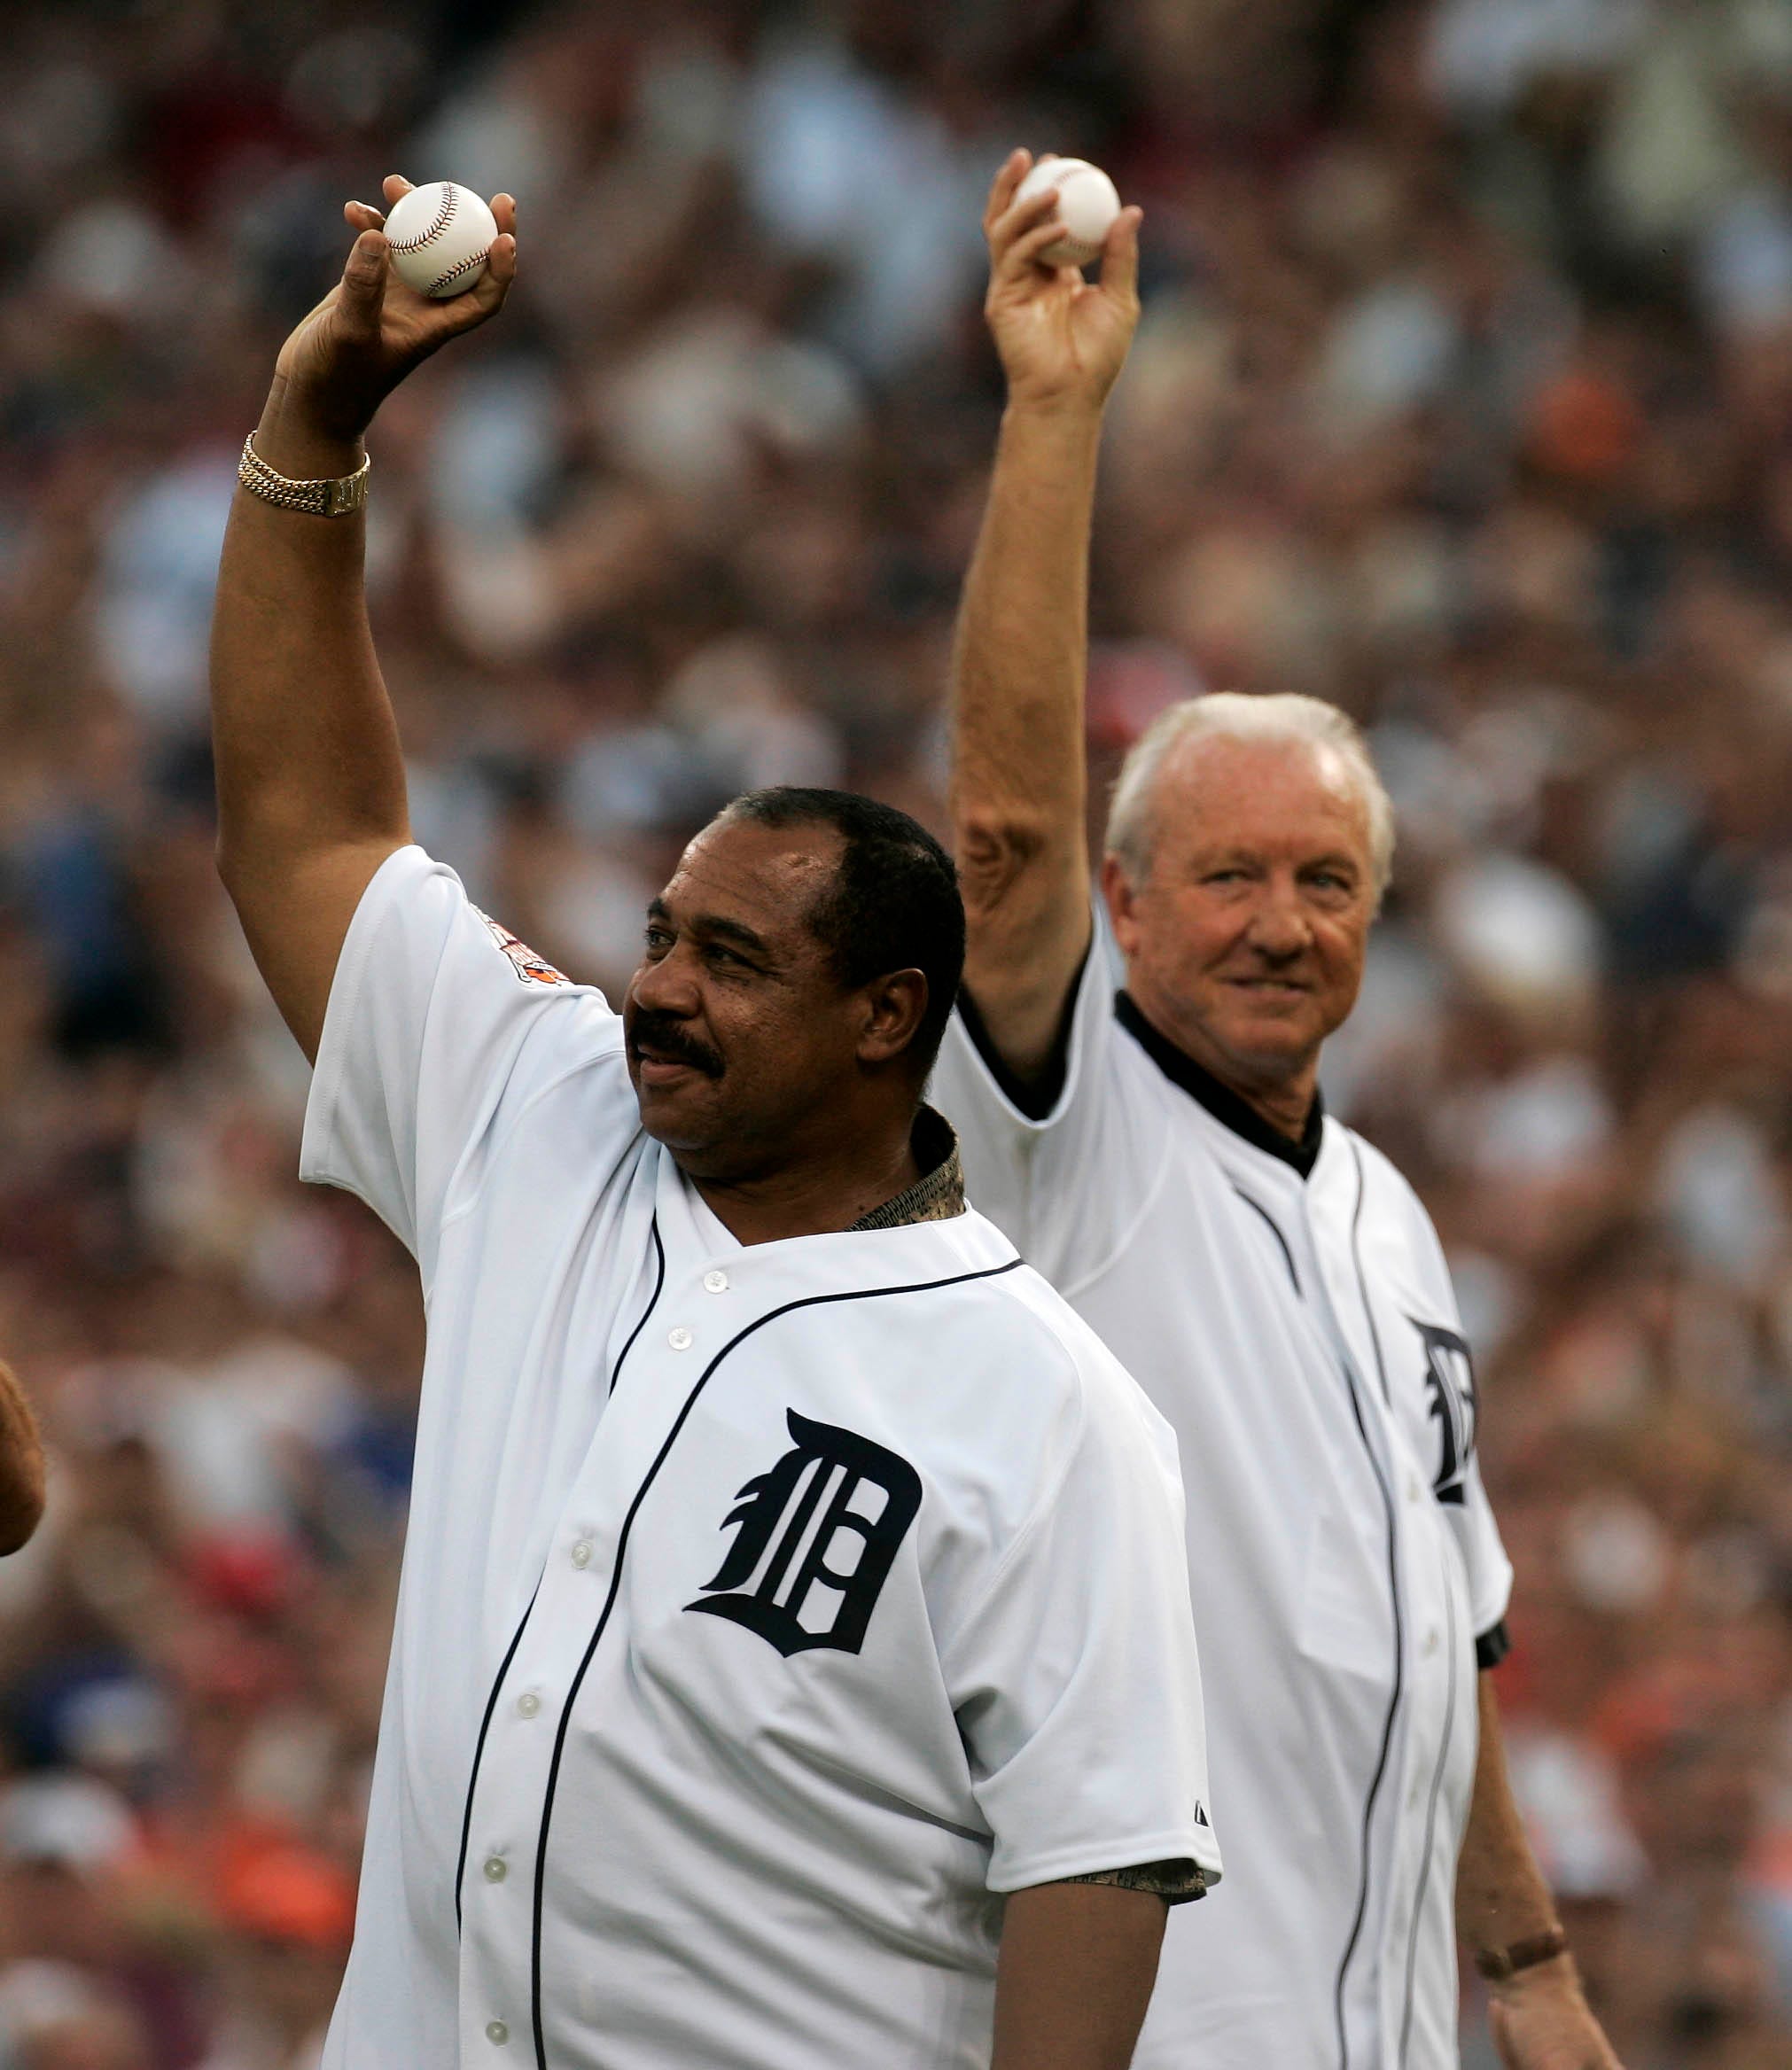 Tiger greats Willie Horton, left, and Al Kaline, wave to the fans before throwing out the ceremonial first pitch, during the All Star game, Tuesday July 12, 2005, at Comerica Park in Detroit.